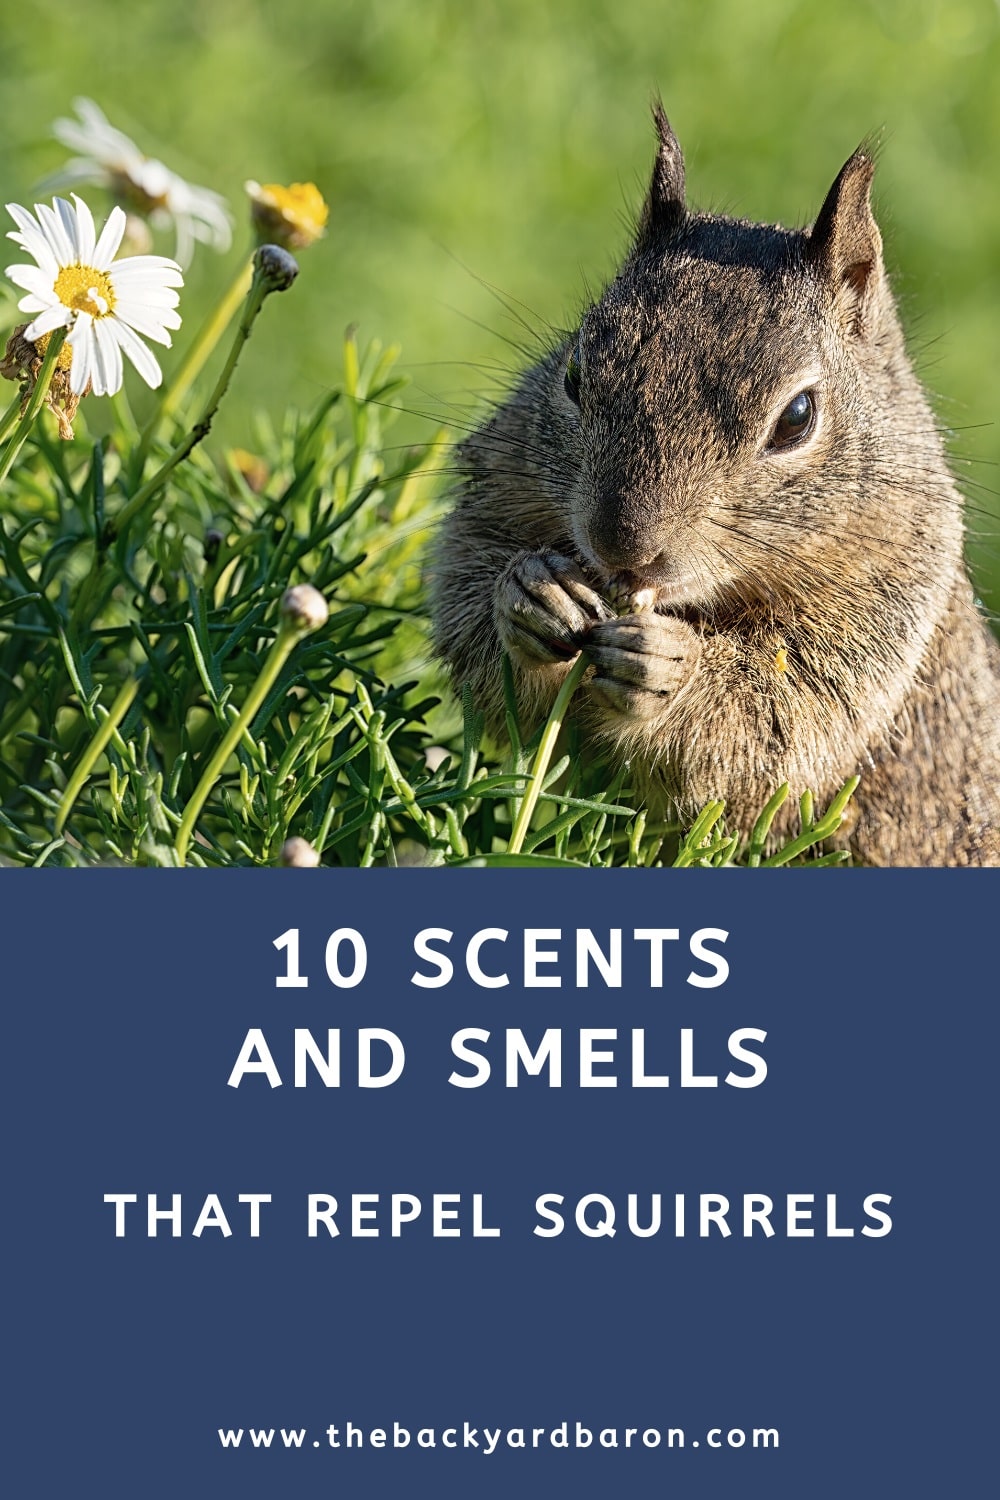 10 Scents and smells that repel squirrels